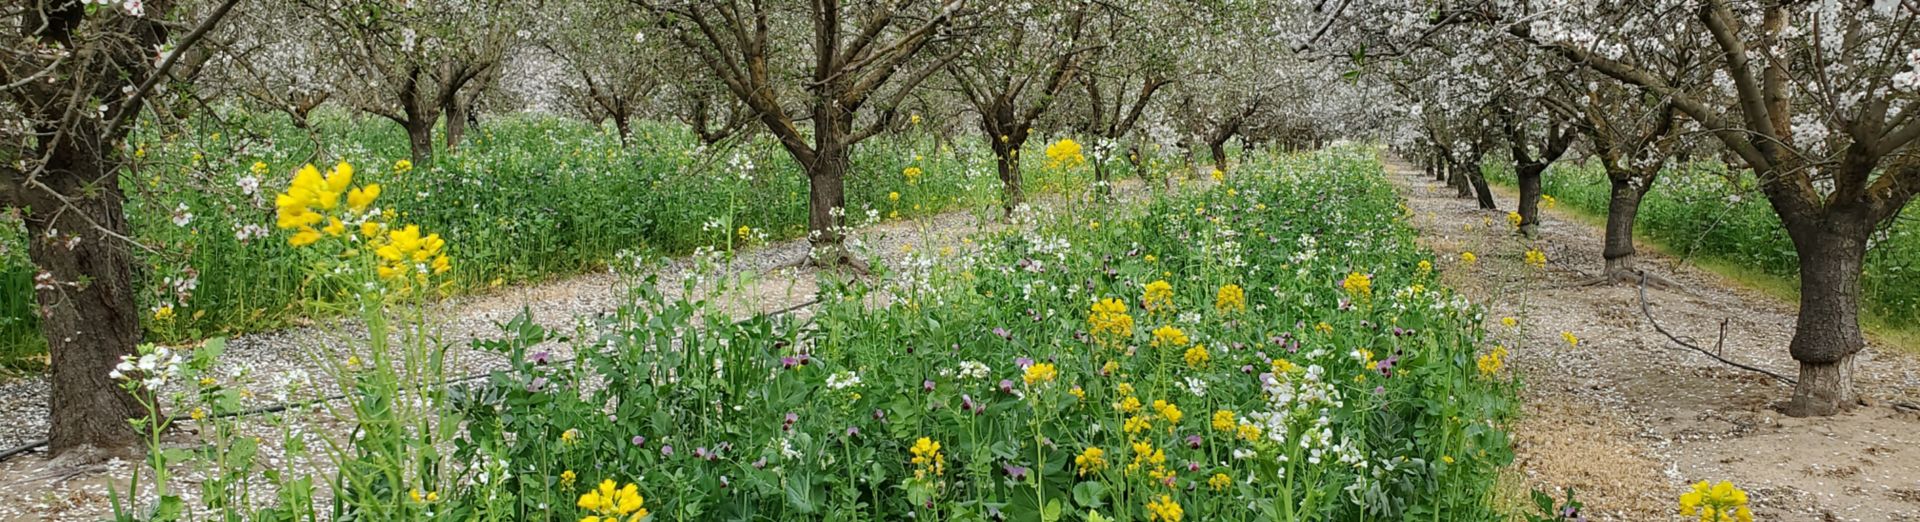 A grove with flowering trees and wild flowers